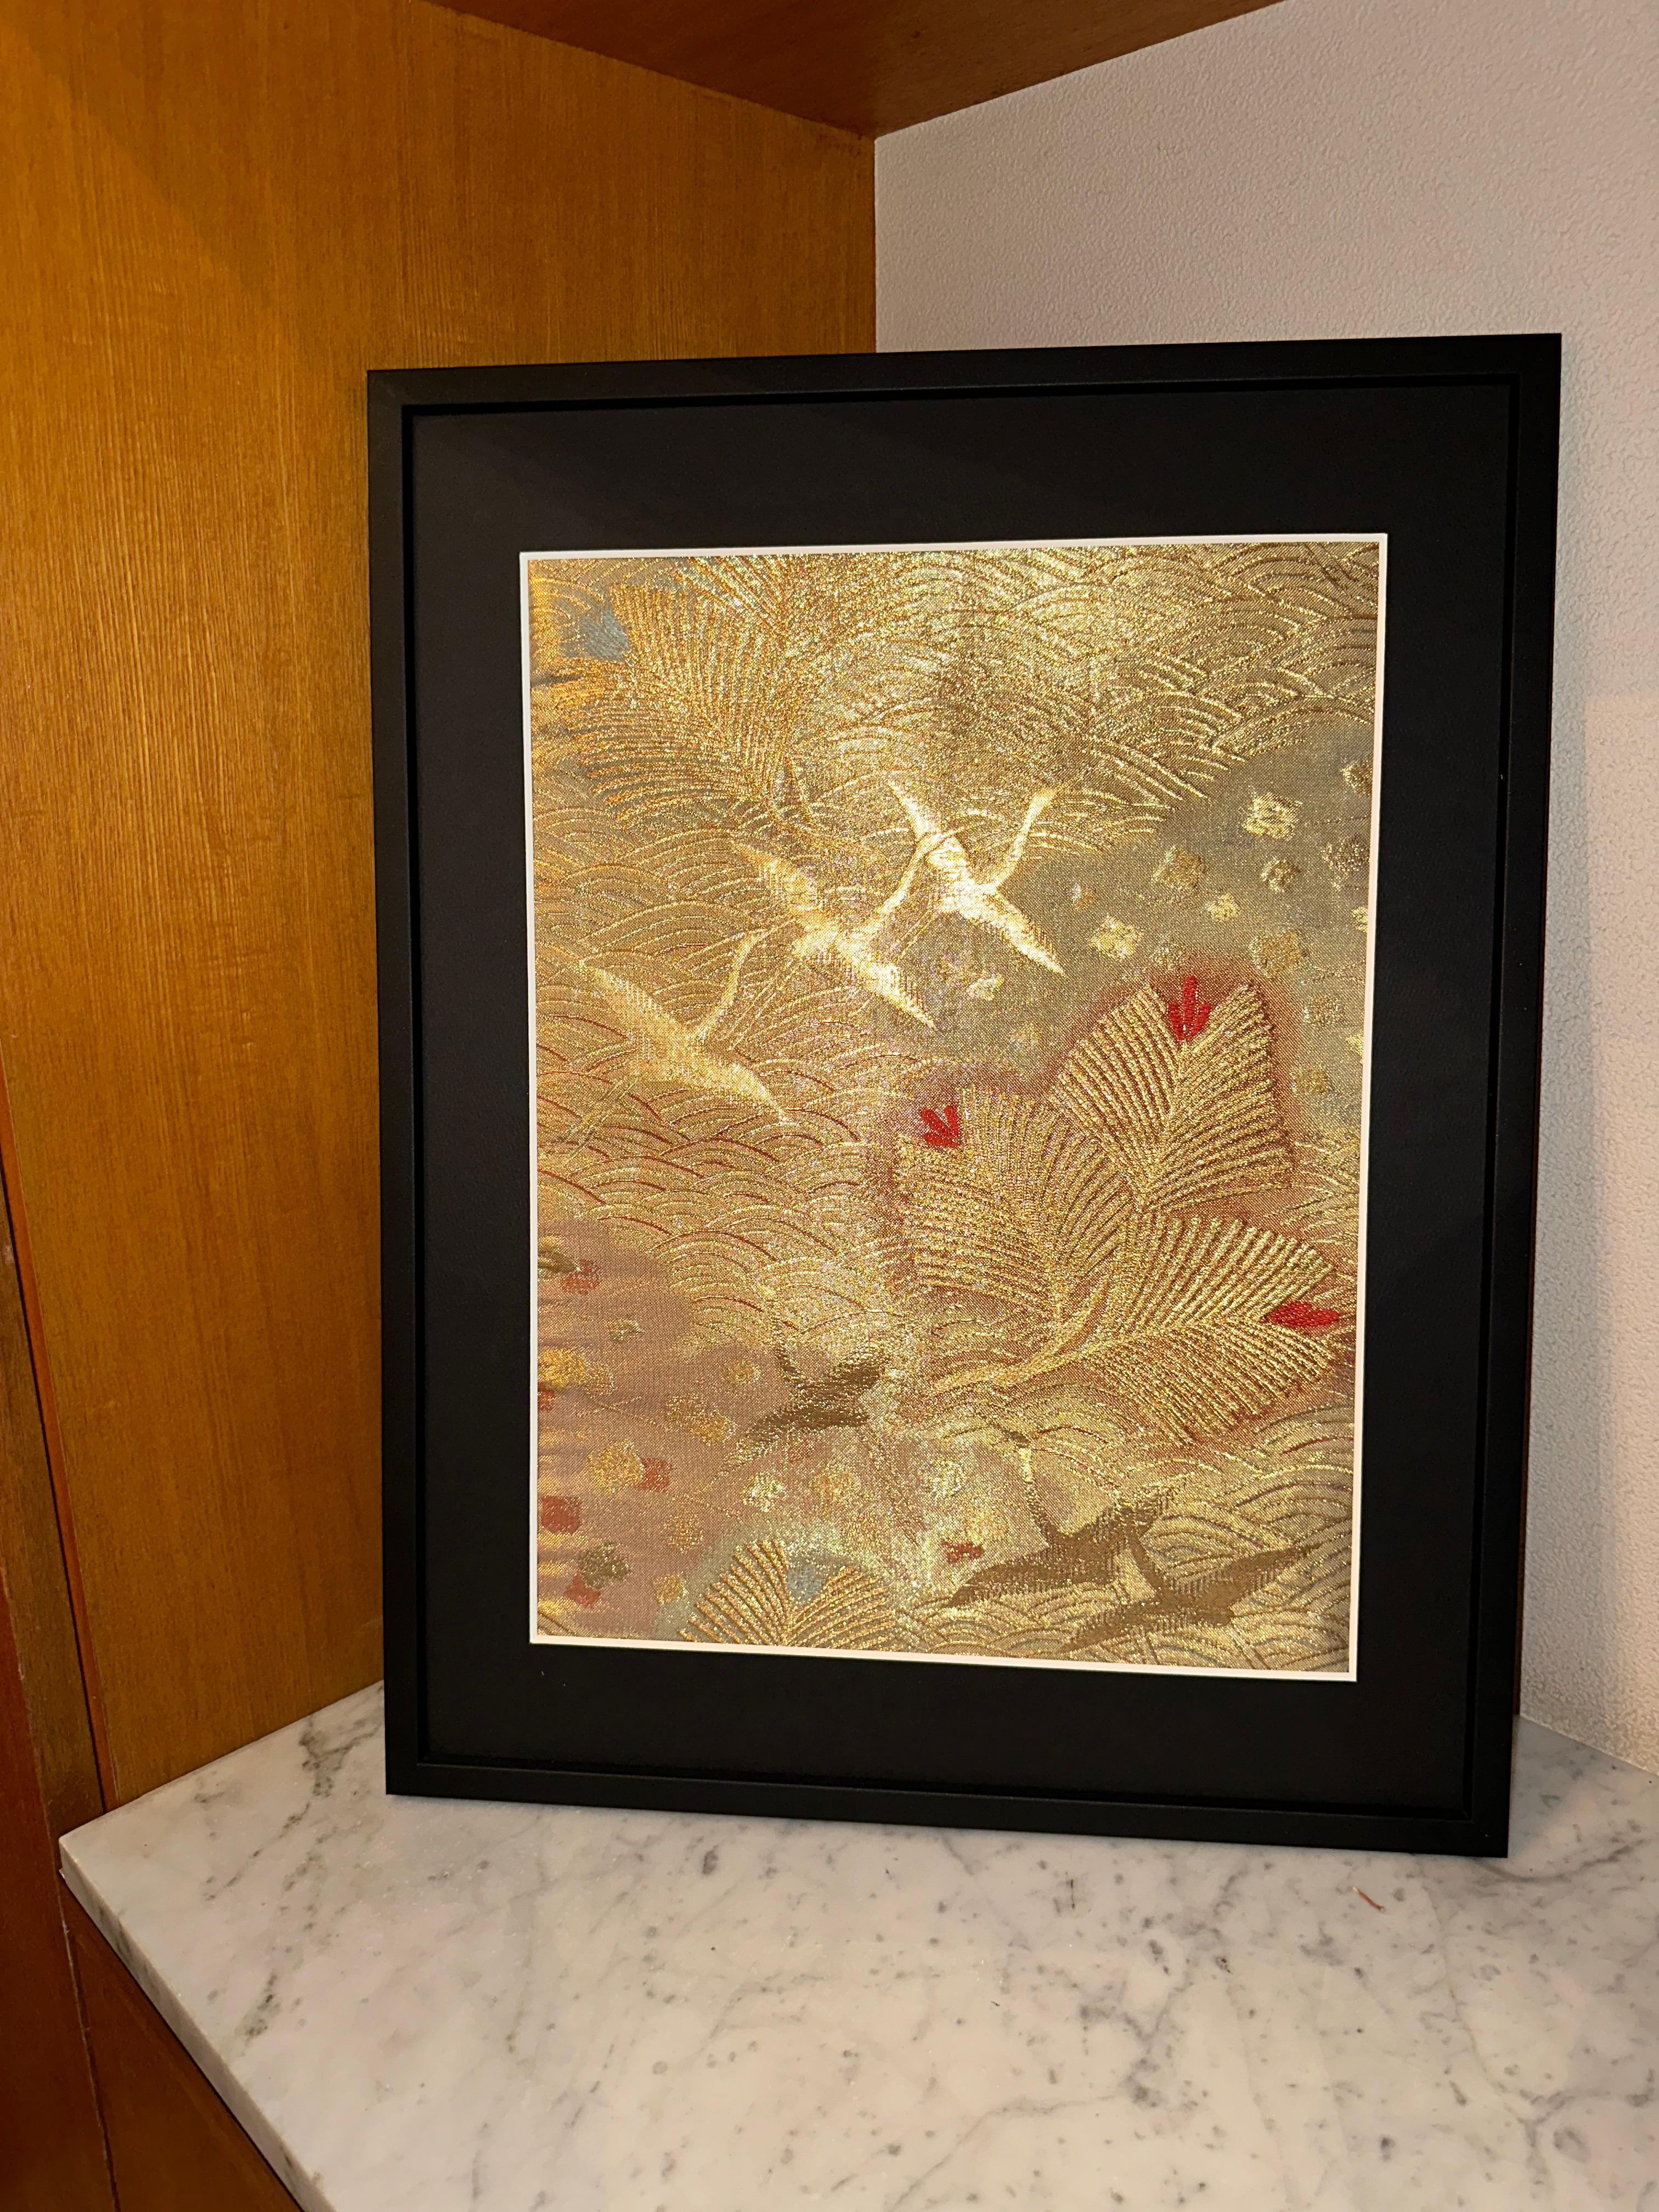 Hand-Crafted Japanese Kimono Art / Embroidered Wall Art, the Grateful Crane For Sale